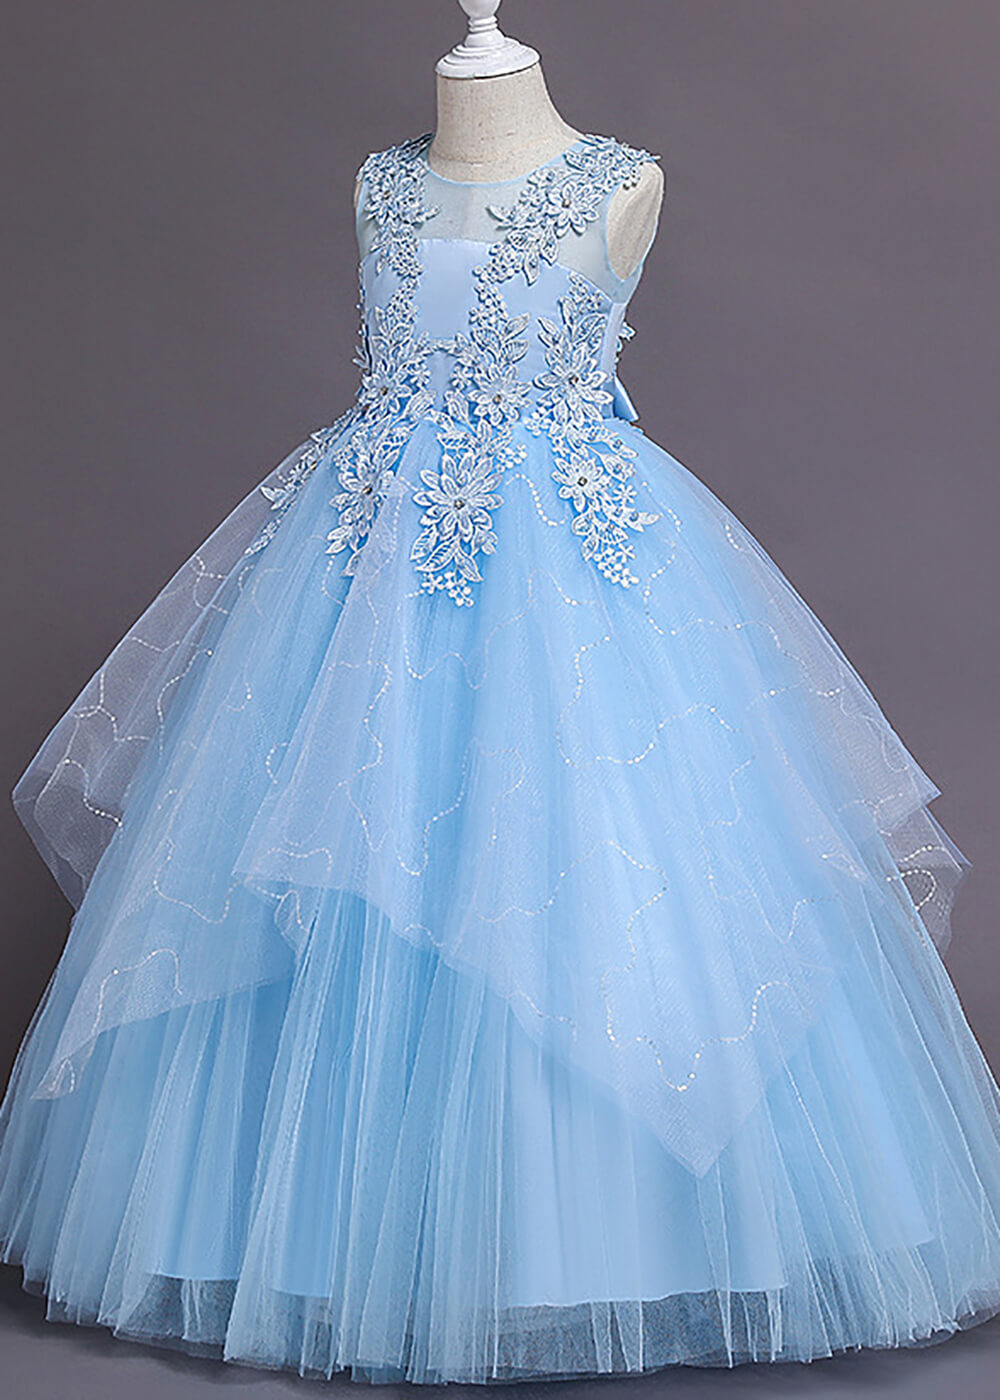 Illusion Neck V-back A-line Tulle Appliques Flower Girl Dress With Bow